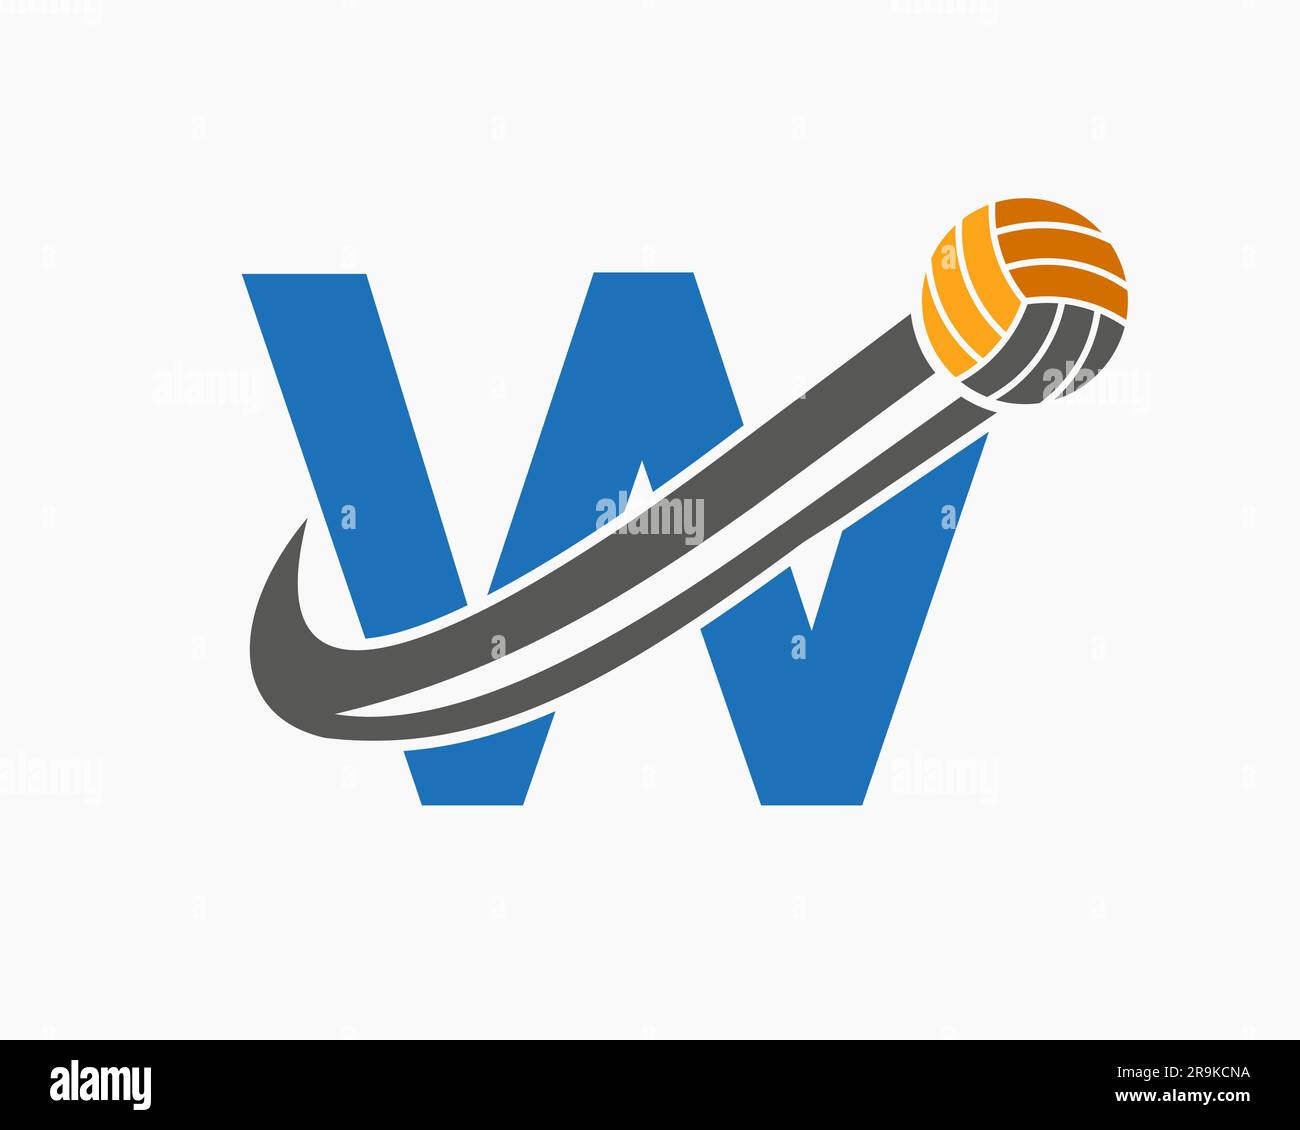 Letter W Volleyball Logo Concept With Moving Volley Ball Icon. Volleyball Sports Logotype Template Stock Vector